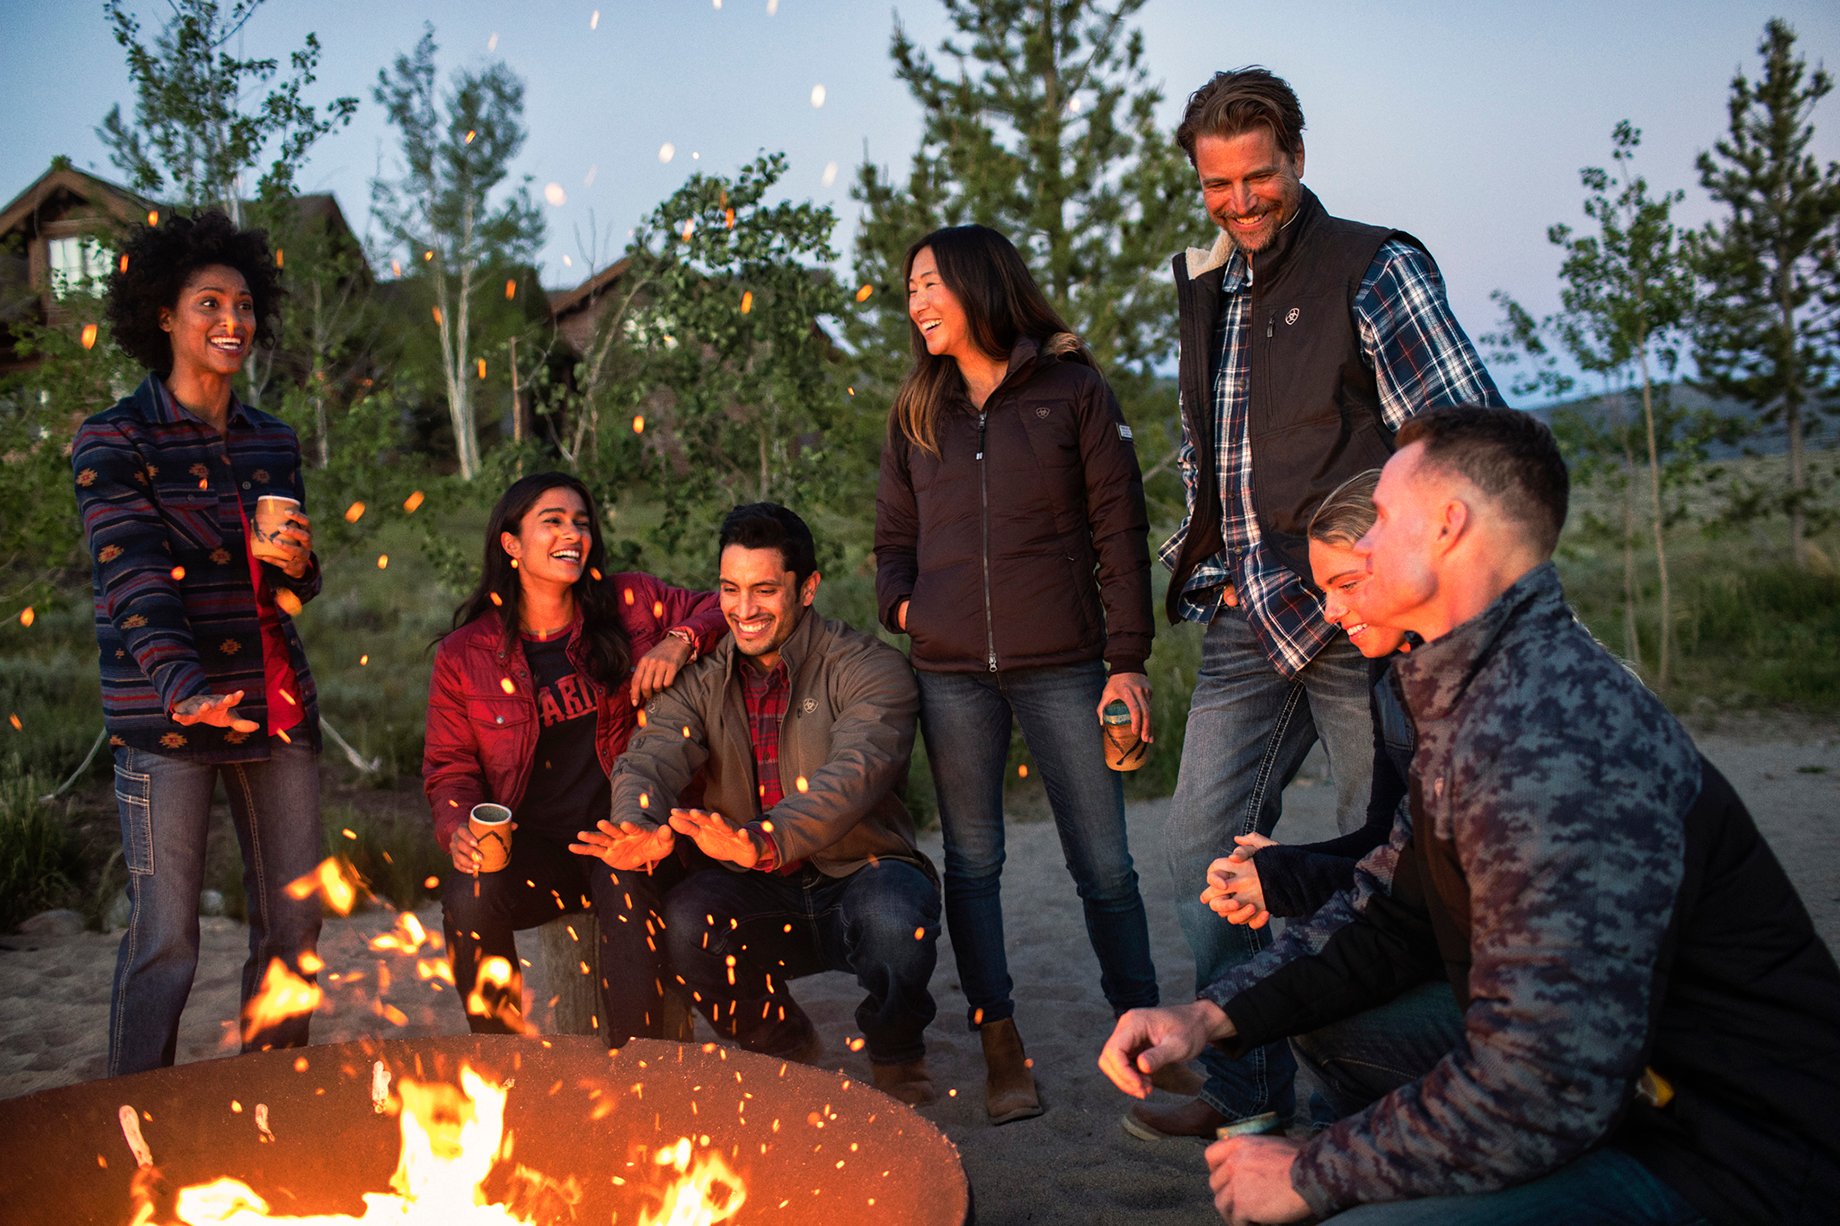 Friends around a campfire shot by Hillary Maybery for Ariat